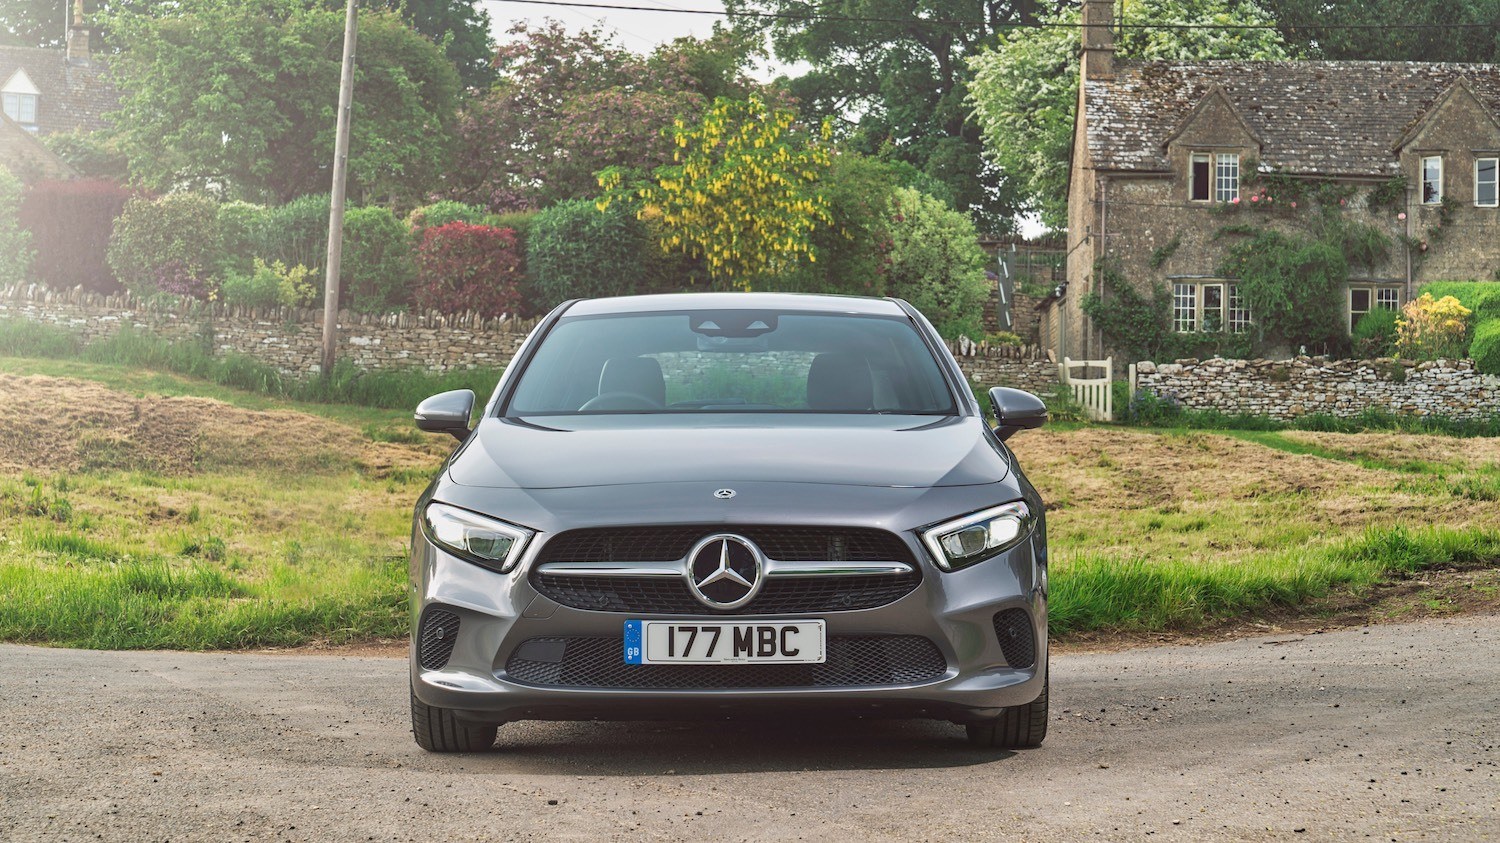 Tim Barnes-Clay reviews the New Mercedes-Benz A-Class 33